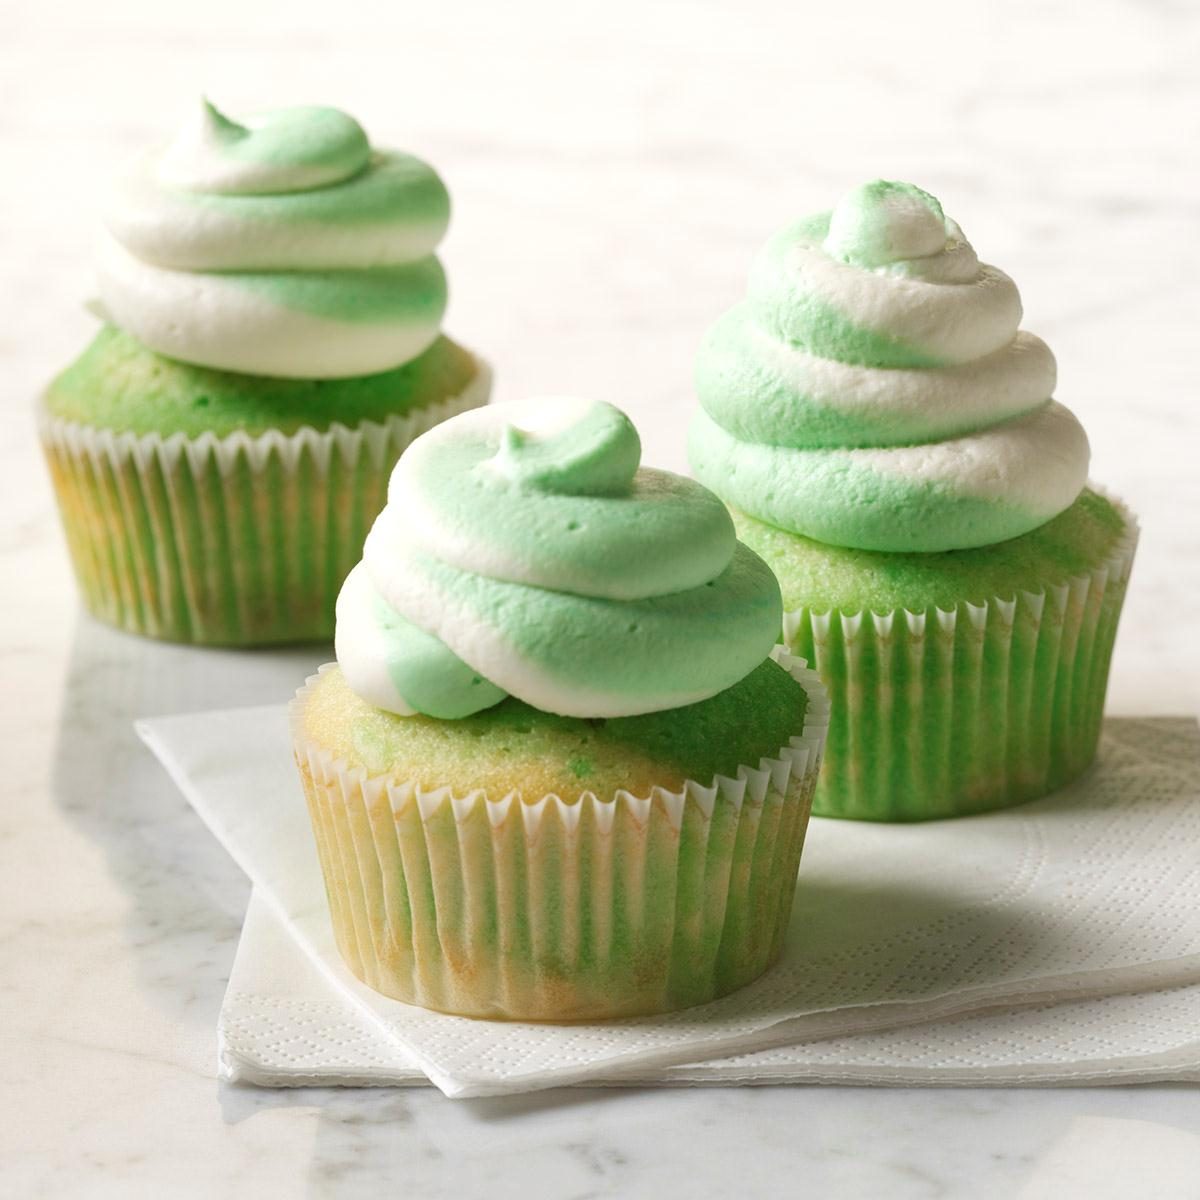 <p>We use creme de menthe, a liqueur that means “mint cream” in French, to add a cool touch to these impressive mascarpone-frosted cupcakes. —Keri Whitney, Castro Valley, California </p> <div class="listicle-page__buttons"> <div class="listicle-page__cta-button"><a href='https://www.tasteofhome.com/recipes/creme-de-menthe-cupcakes/'>Get Recipe</a></div> </div>